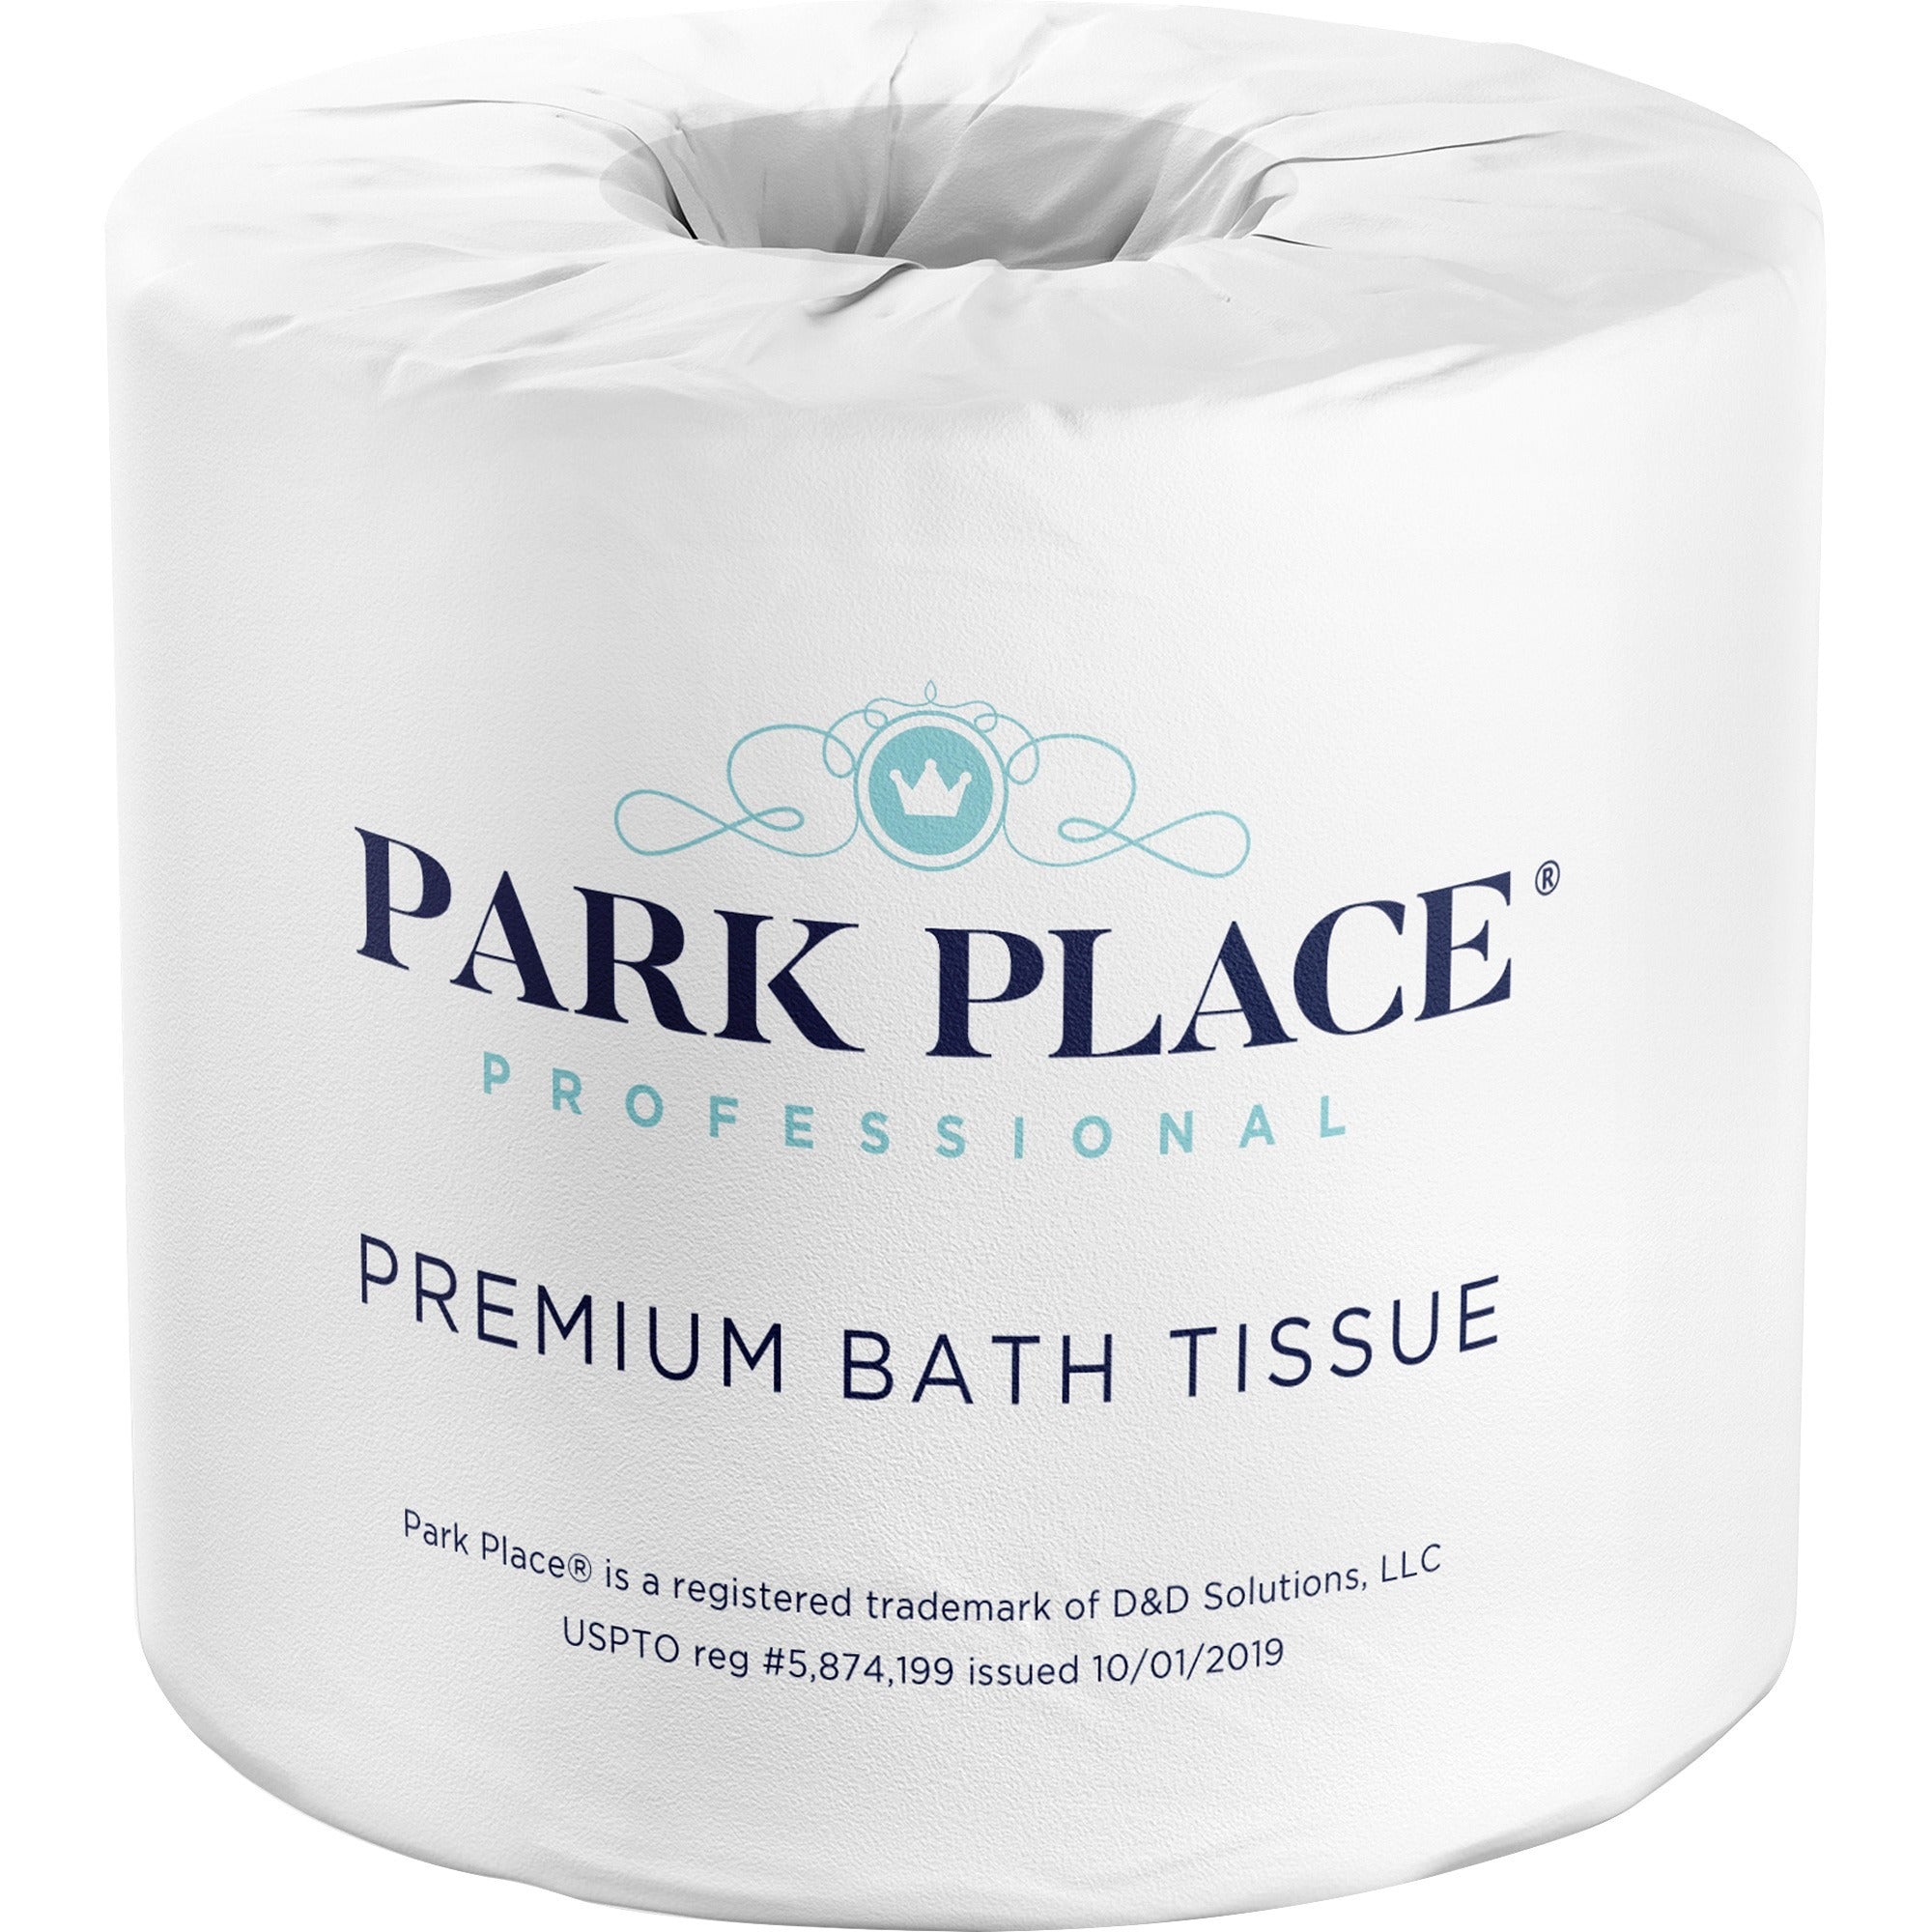 park-place-double-ply-premium-bath-tissue-rolls-2-ply-420-sheets-roll-white-for-bathroom-96-carton_suvprkvbt96 - 2